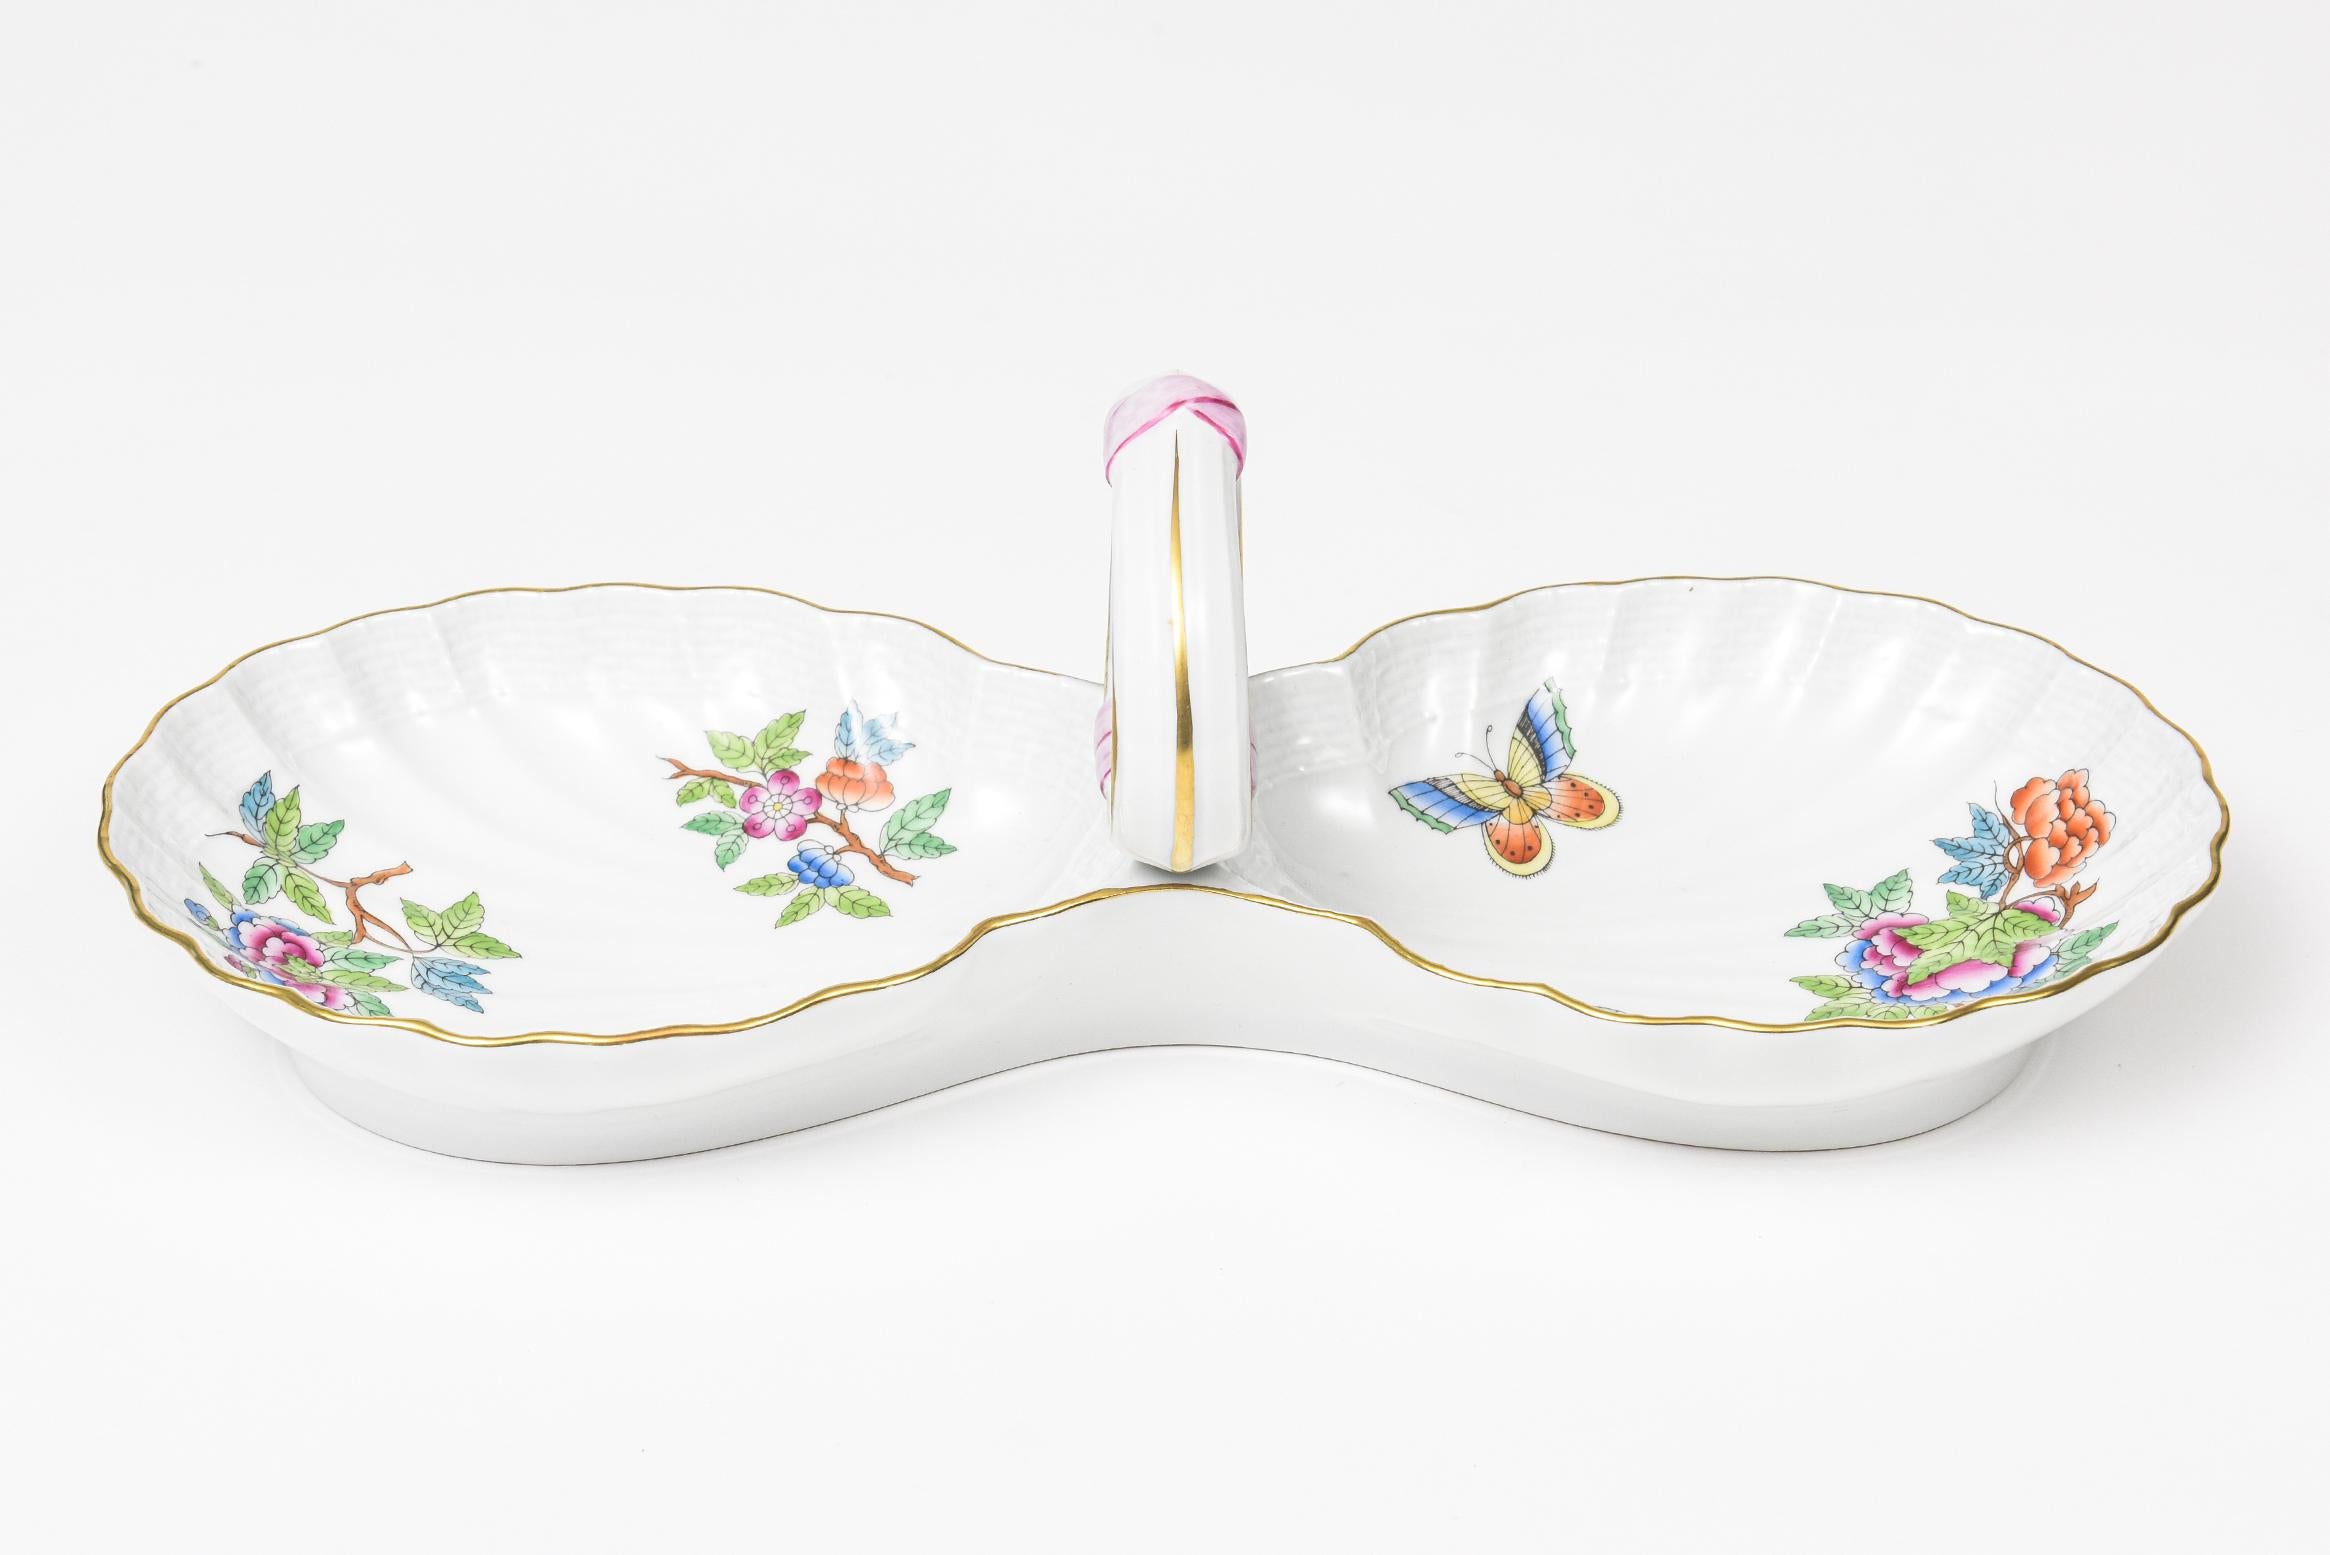 Elegant Herend China 2-part relish dish. This is the older pattern of Queen Victoria that does not have the green border. It has a weave rim and a gold edge. The pattern features flowers and butterflies and a pink ribbon accent on the handle.